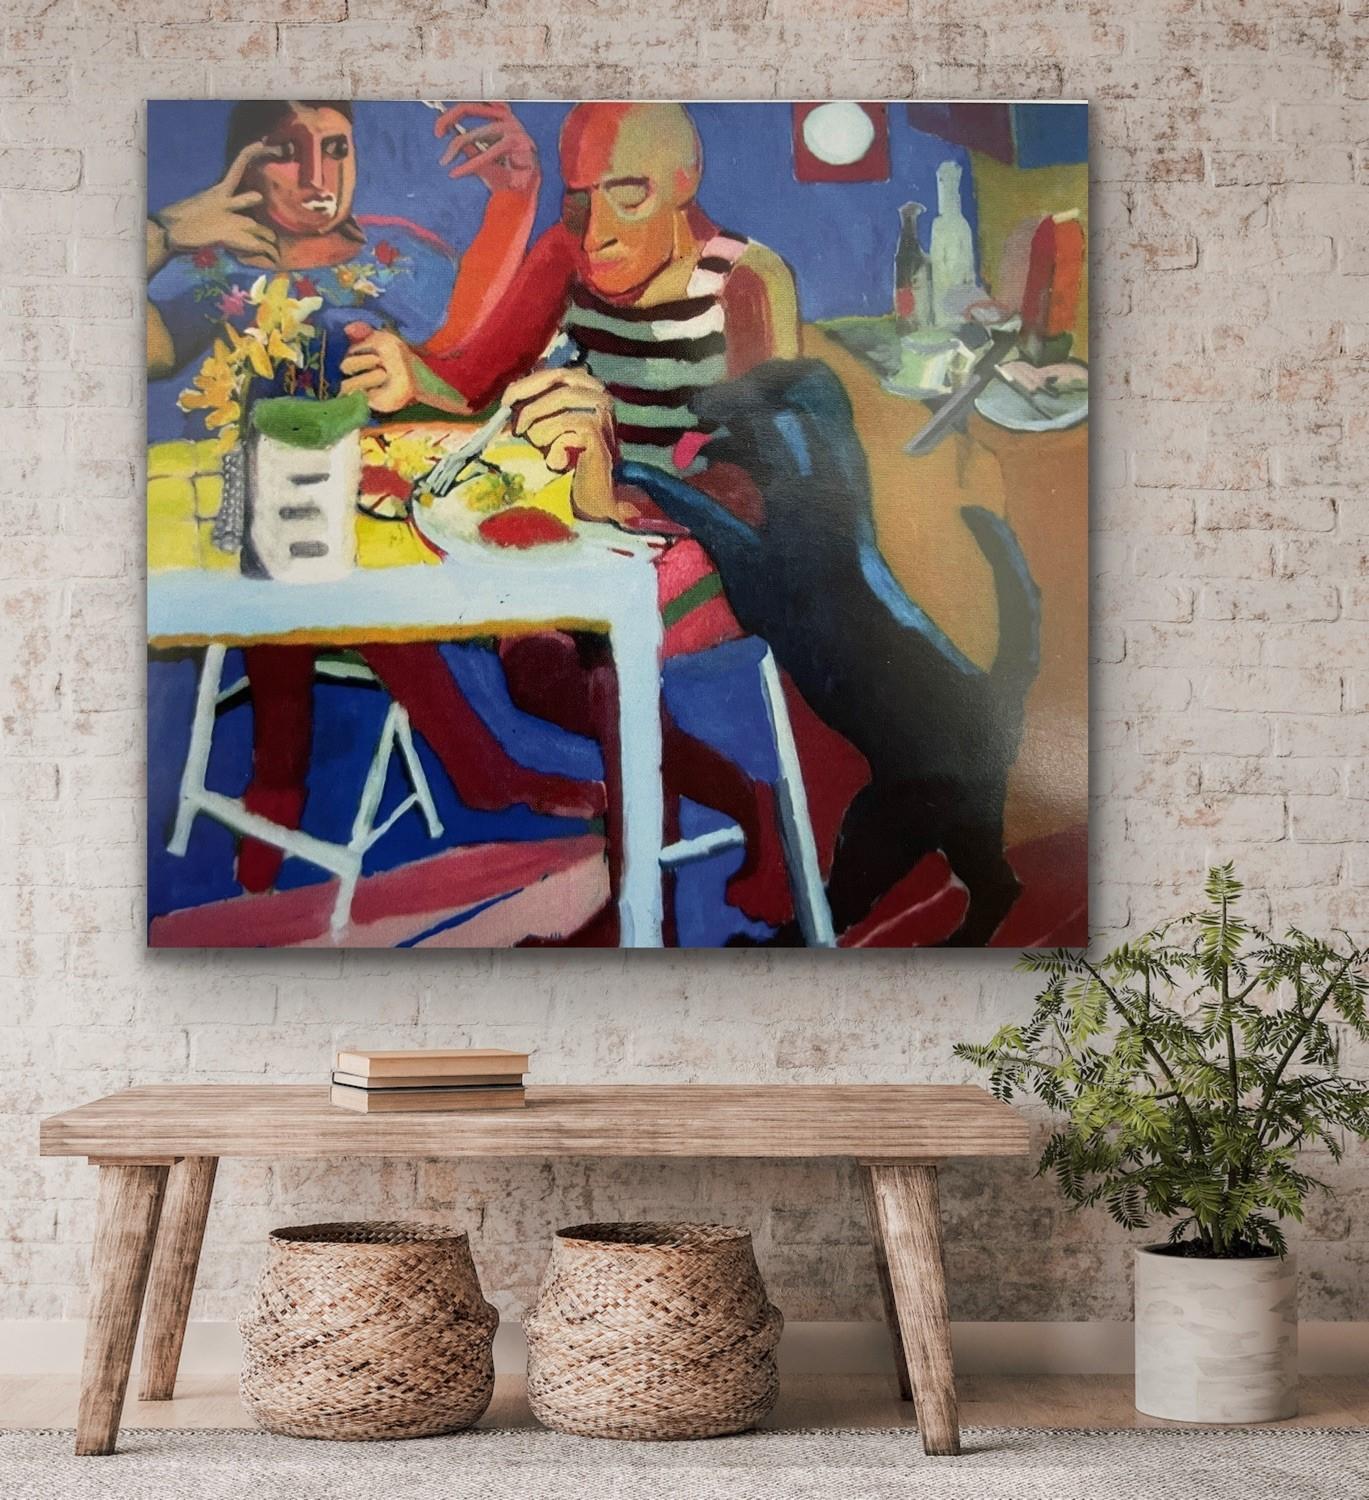 Magaiver, 60 x 66, quirky surreal figurative work paying homage to Picasso  - Abstract Expressionist Painting by Erin Haldrup